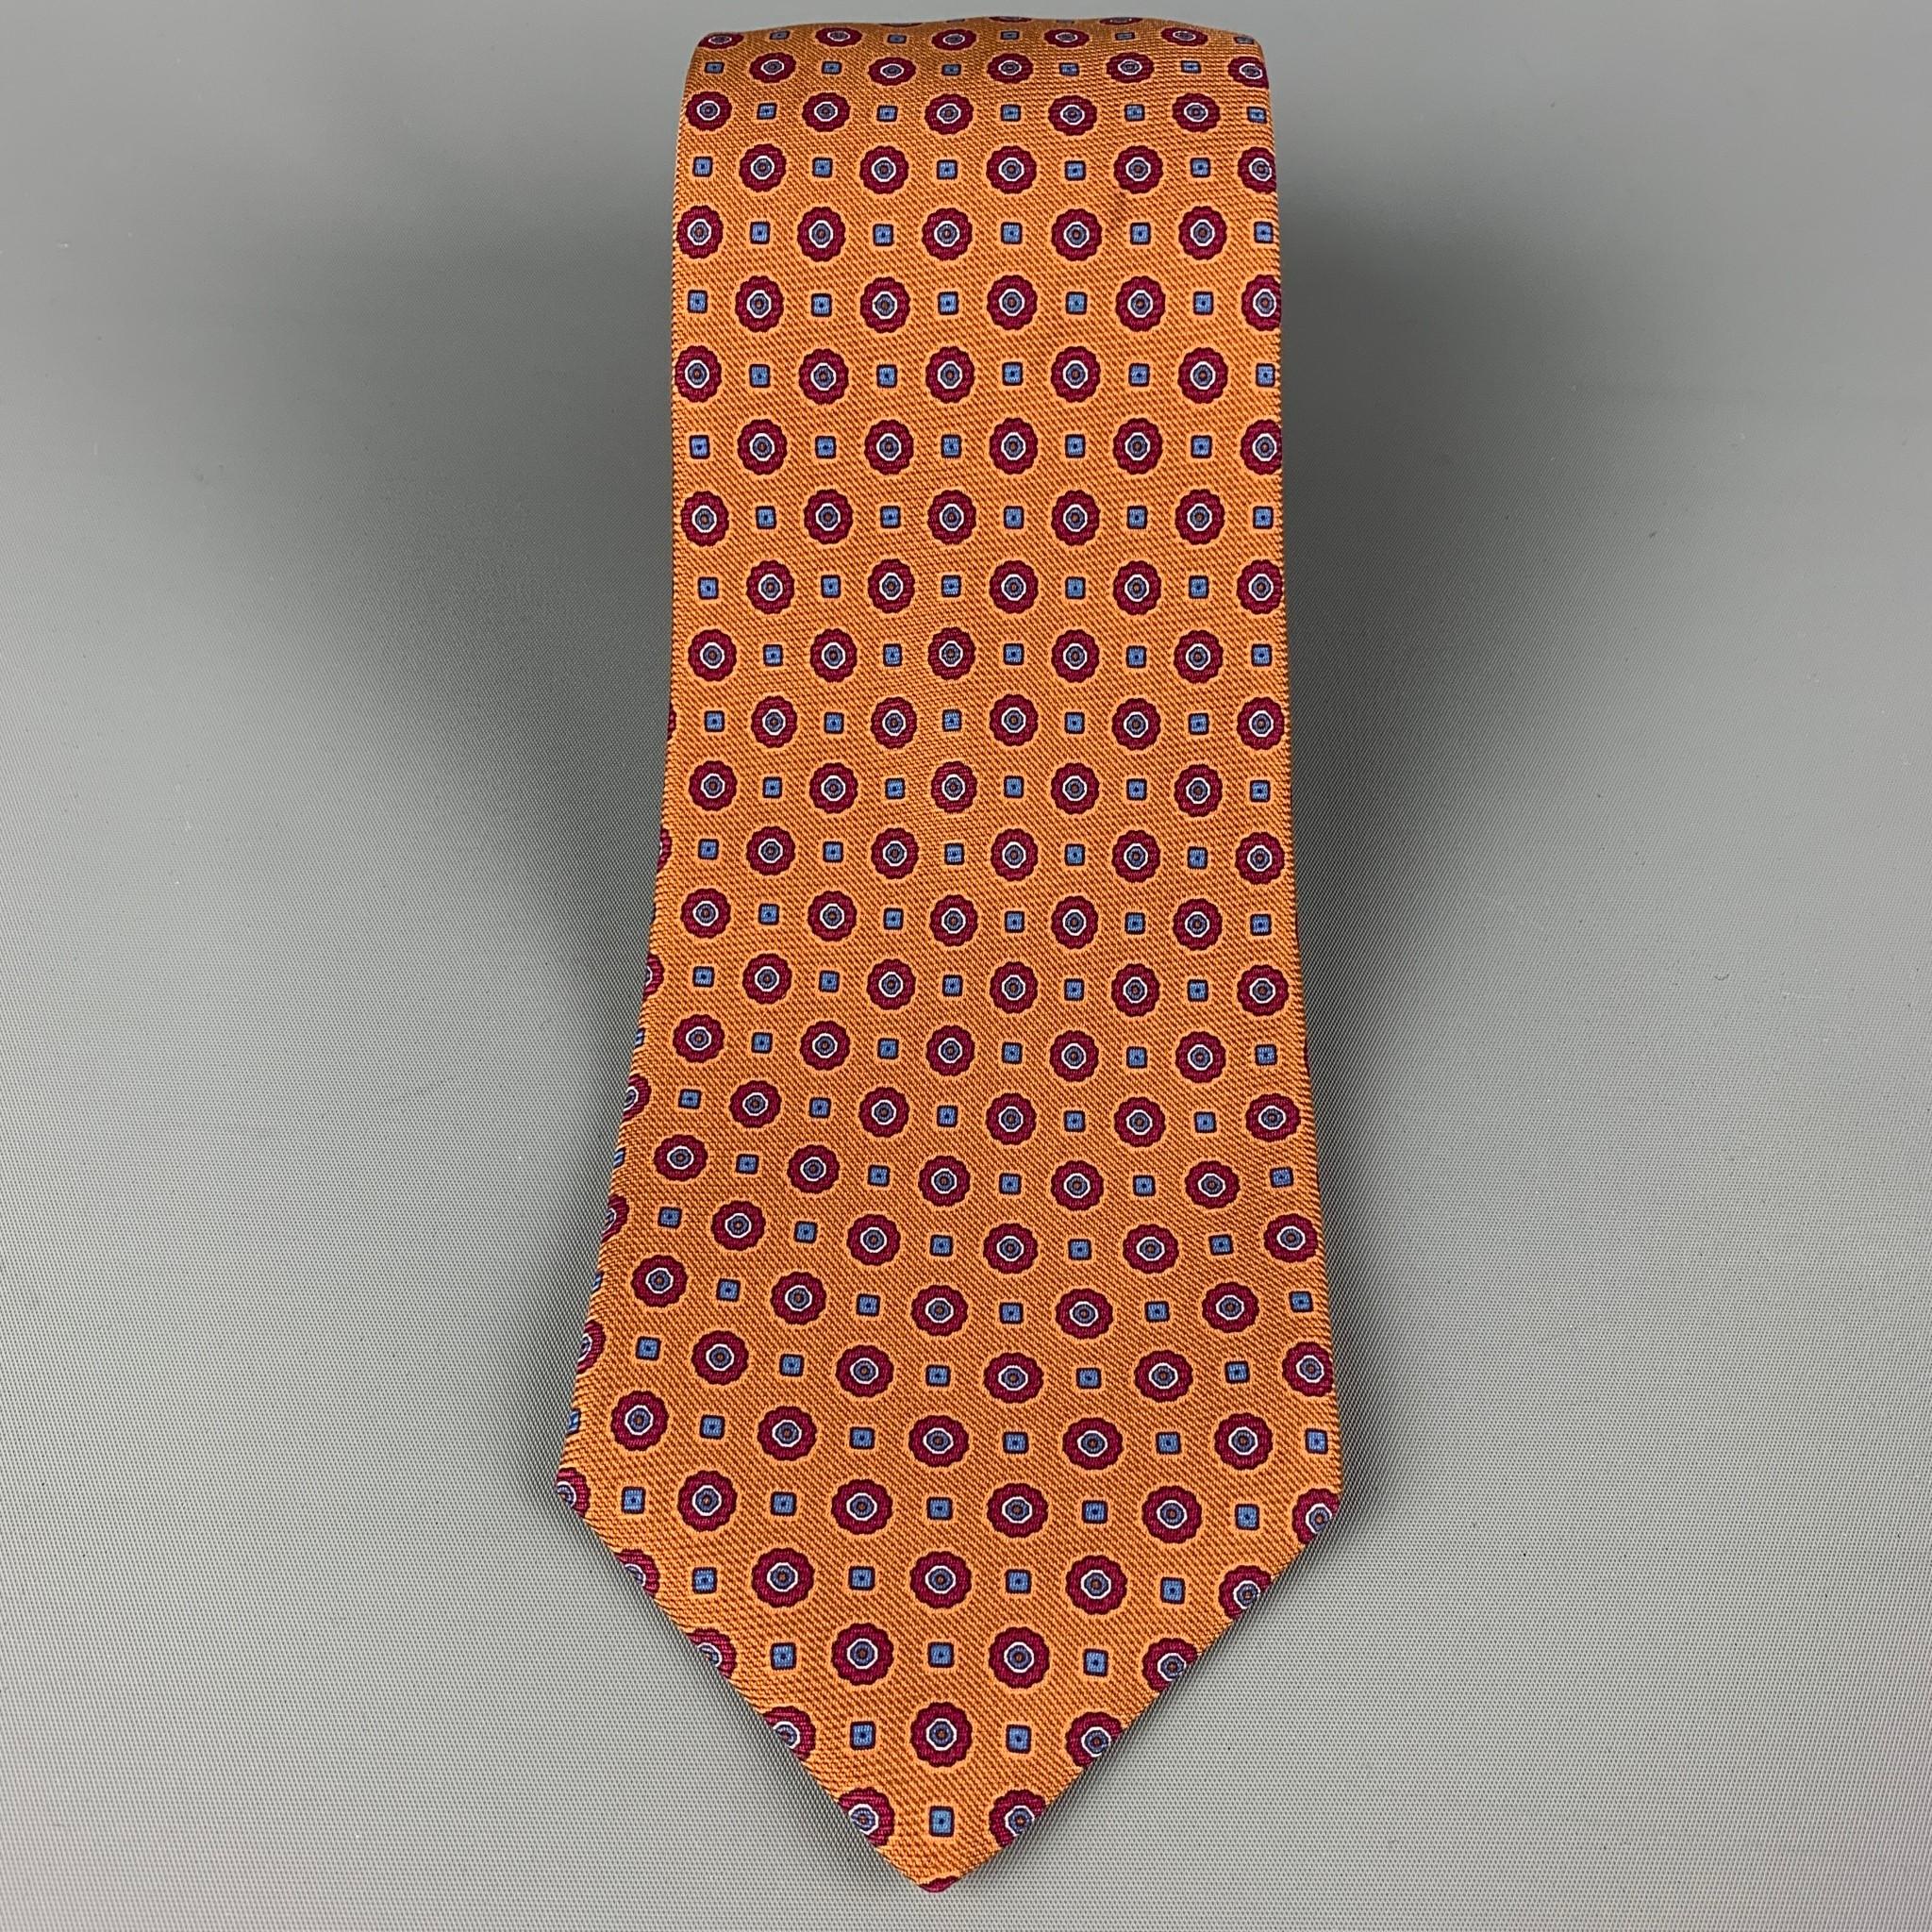 KITON necktie comes in a copper & burgundy silk with a all over dot print. Made in Italy .

Very Good Pre-Owned Condition.
Original Retail Price: $345.00

Width: 4 in.
Length: 62 in. 